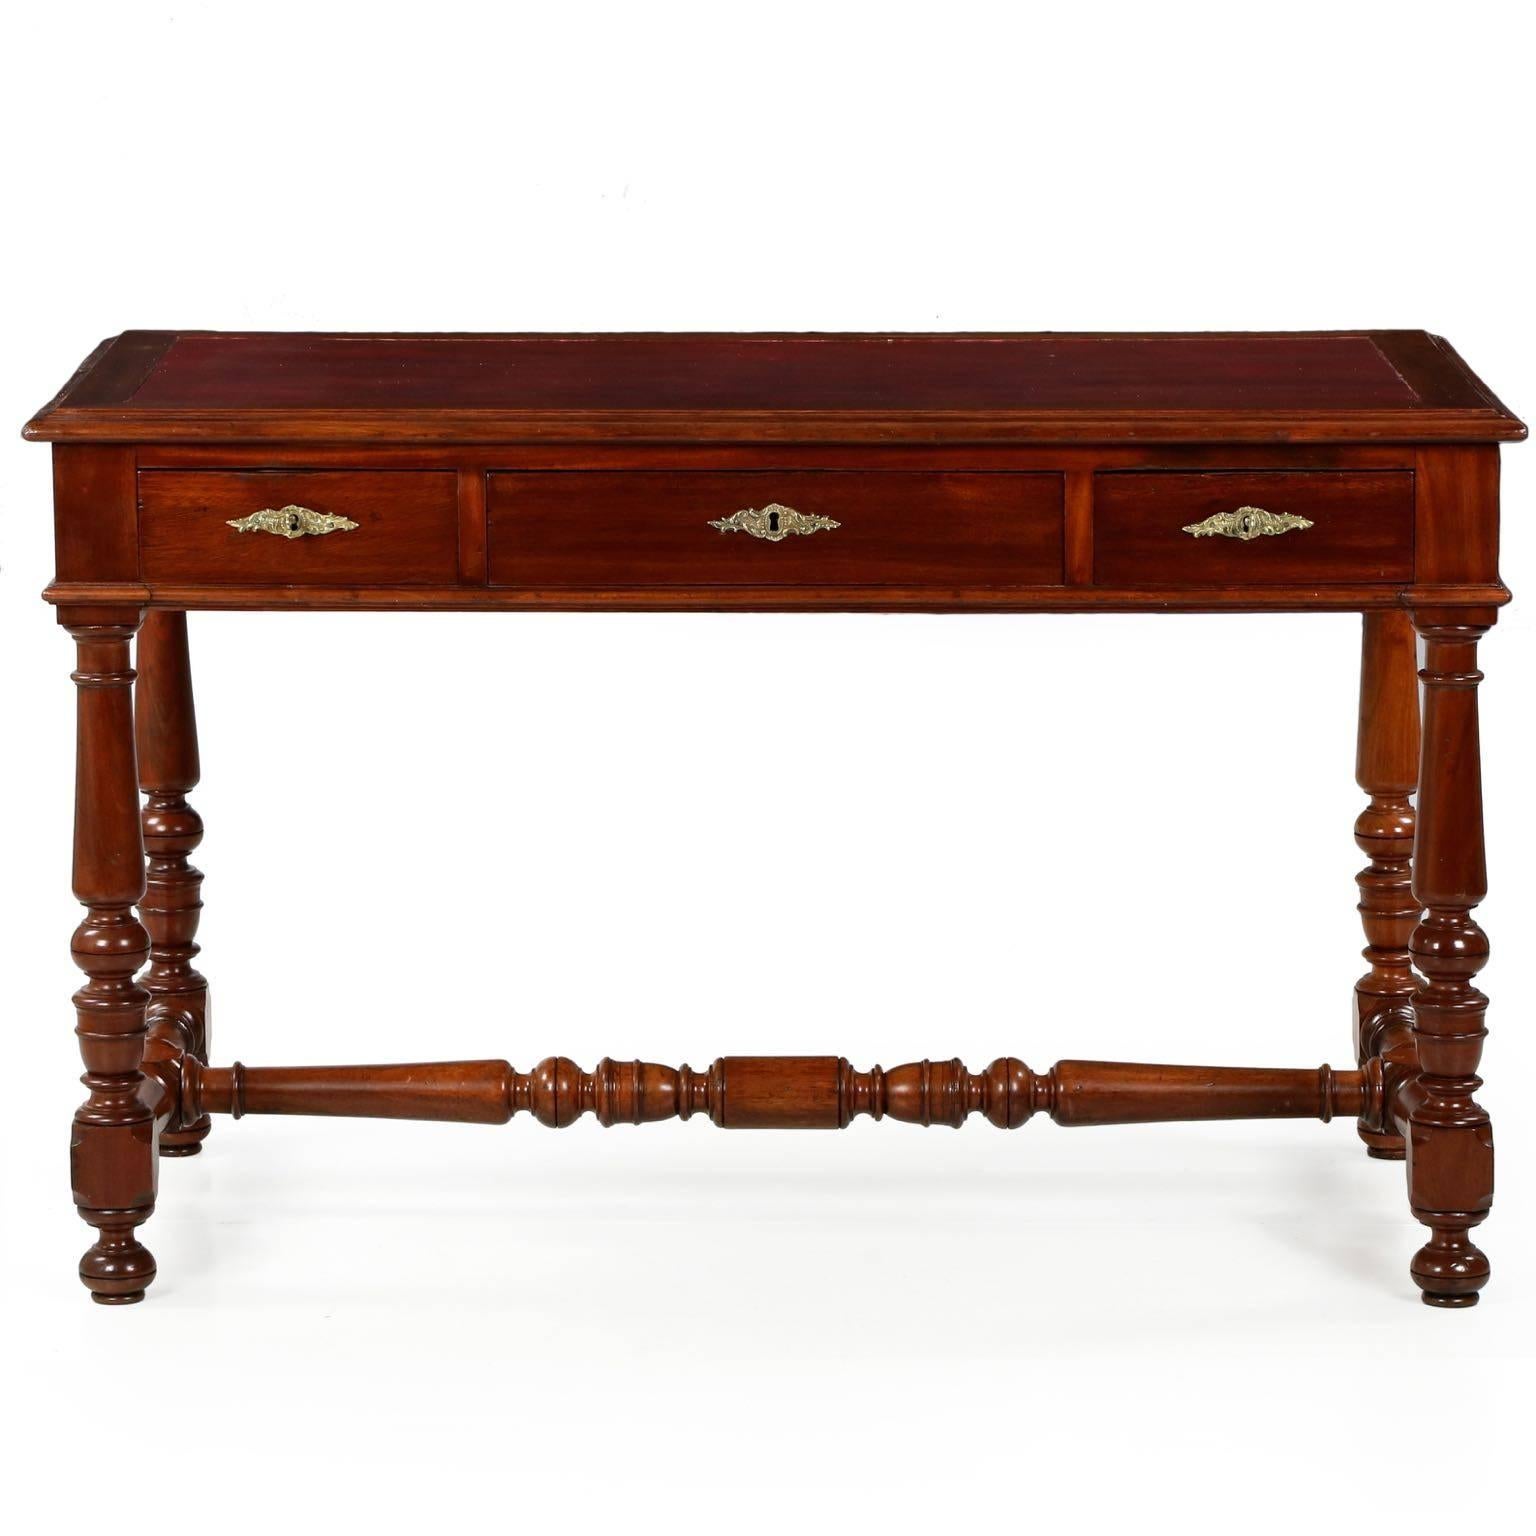 A very well crafted writing desk from the turn of the century, this is almost certainly an English piece, the craftsmanship tight and precise throughout. The simple molded top frames a relatively fresh untooled red leather writing surface,